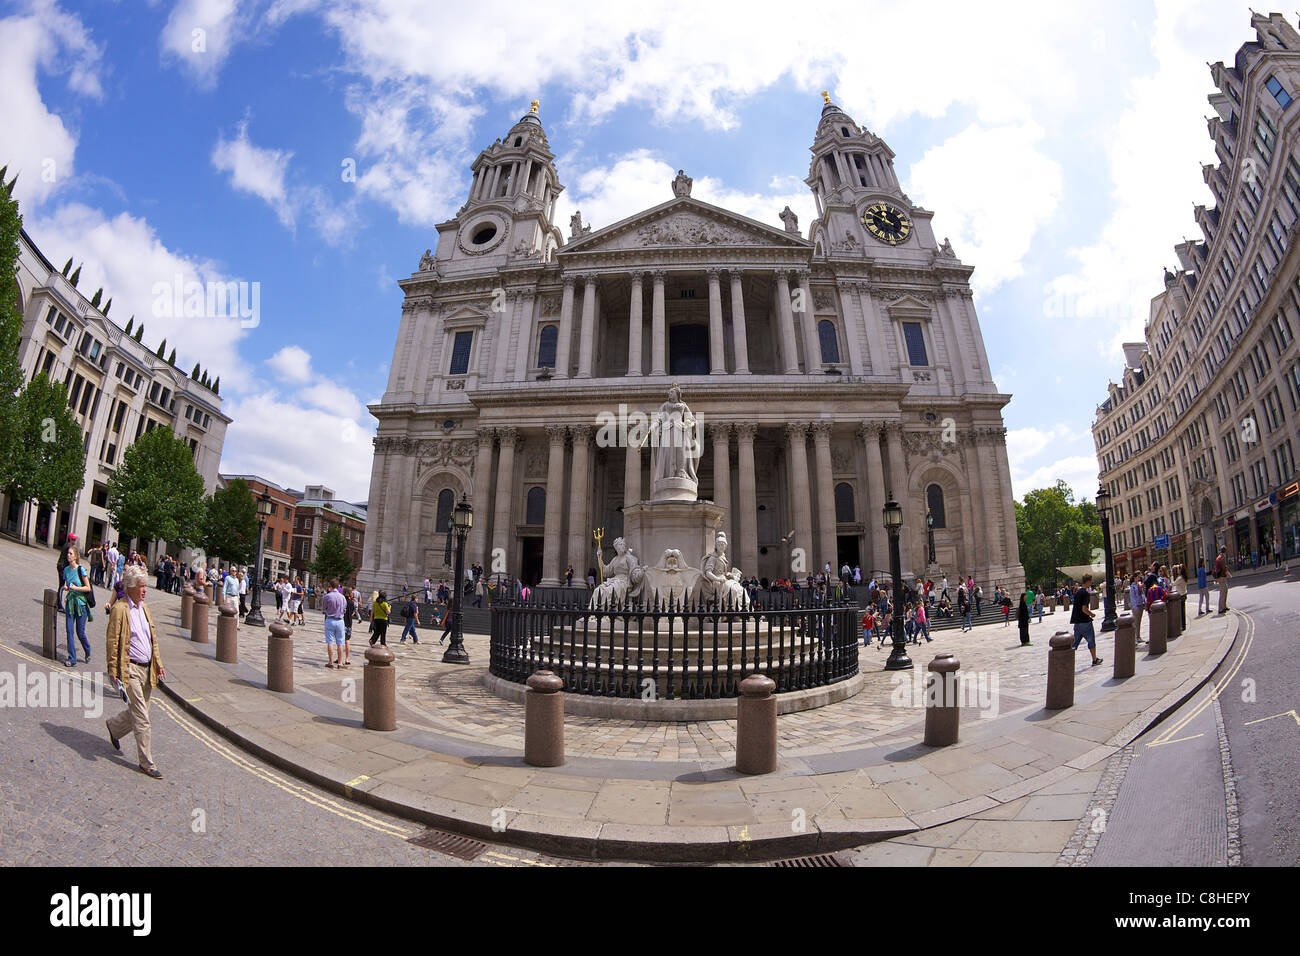 Tourists and visitors outside St Paul's Cathedral, City of London, England, UK, United Kingdom, GB, Great Britain, British Isles Stock Photo